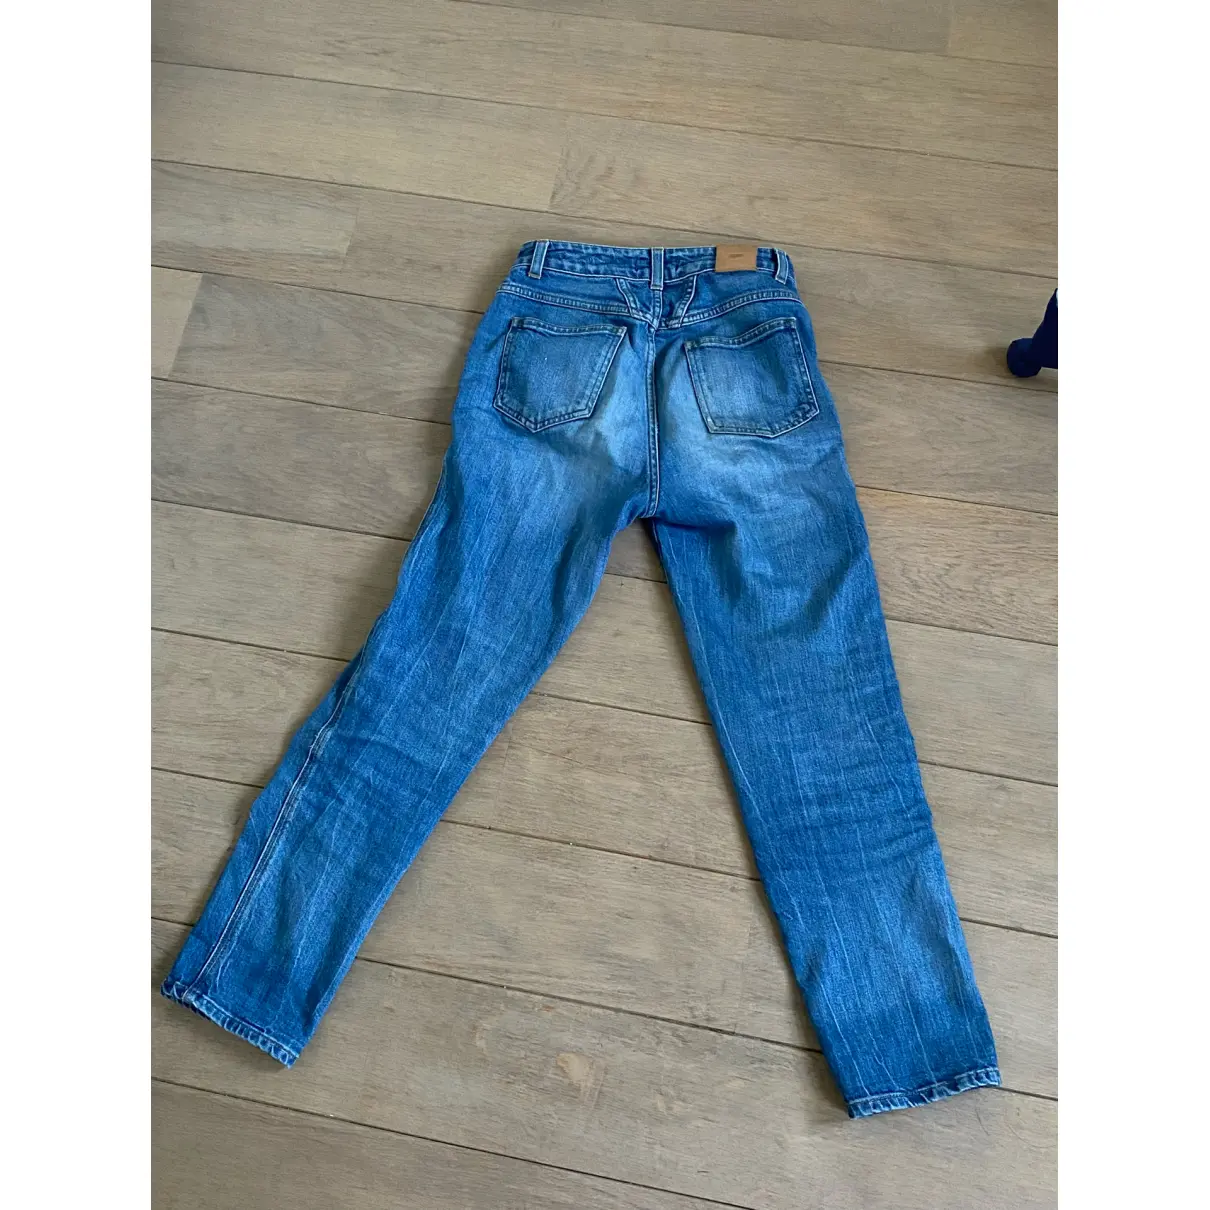 Buy Closed Jeans online